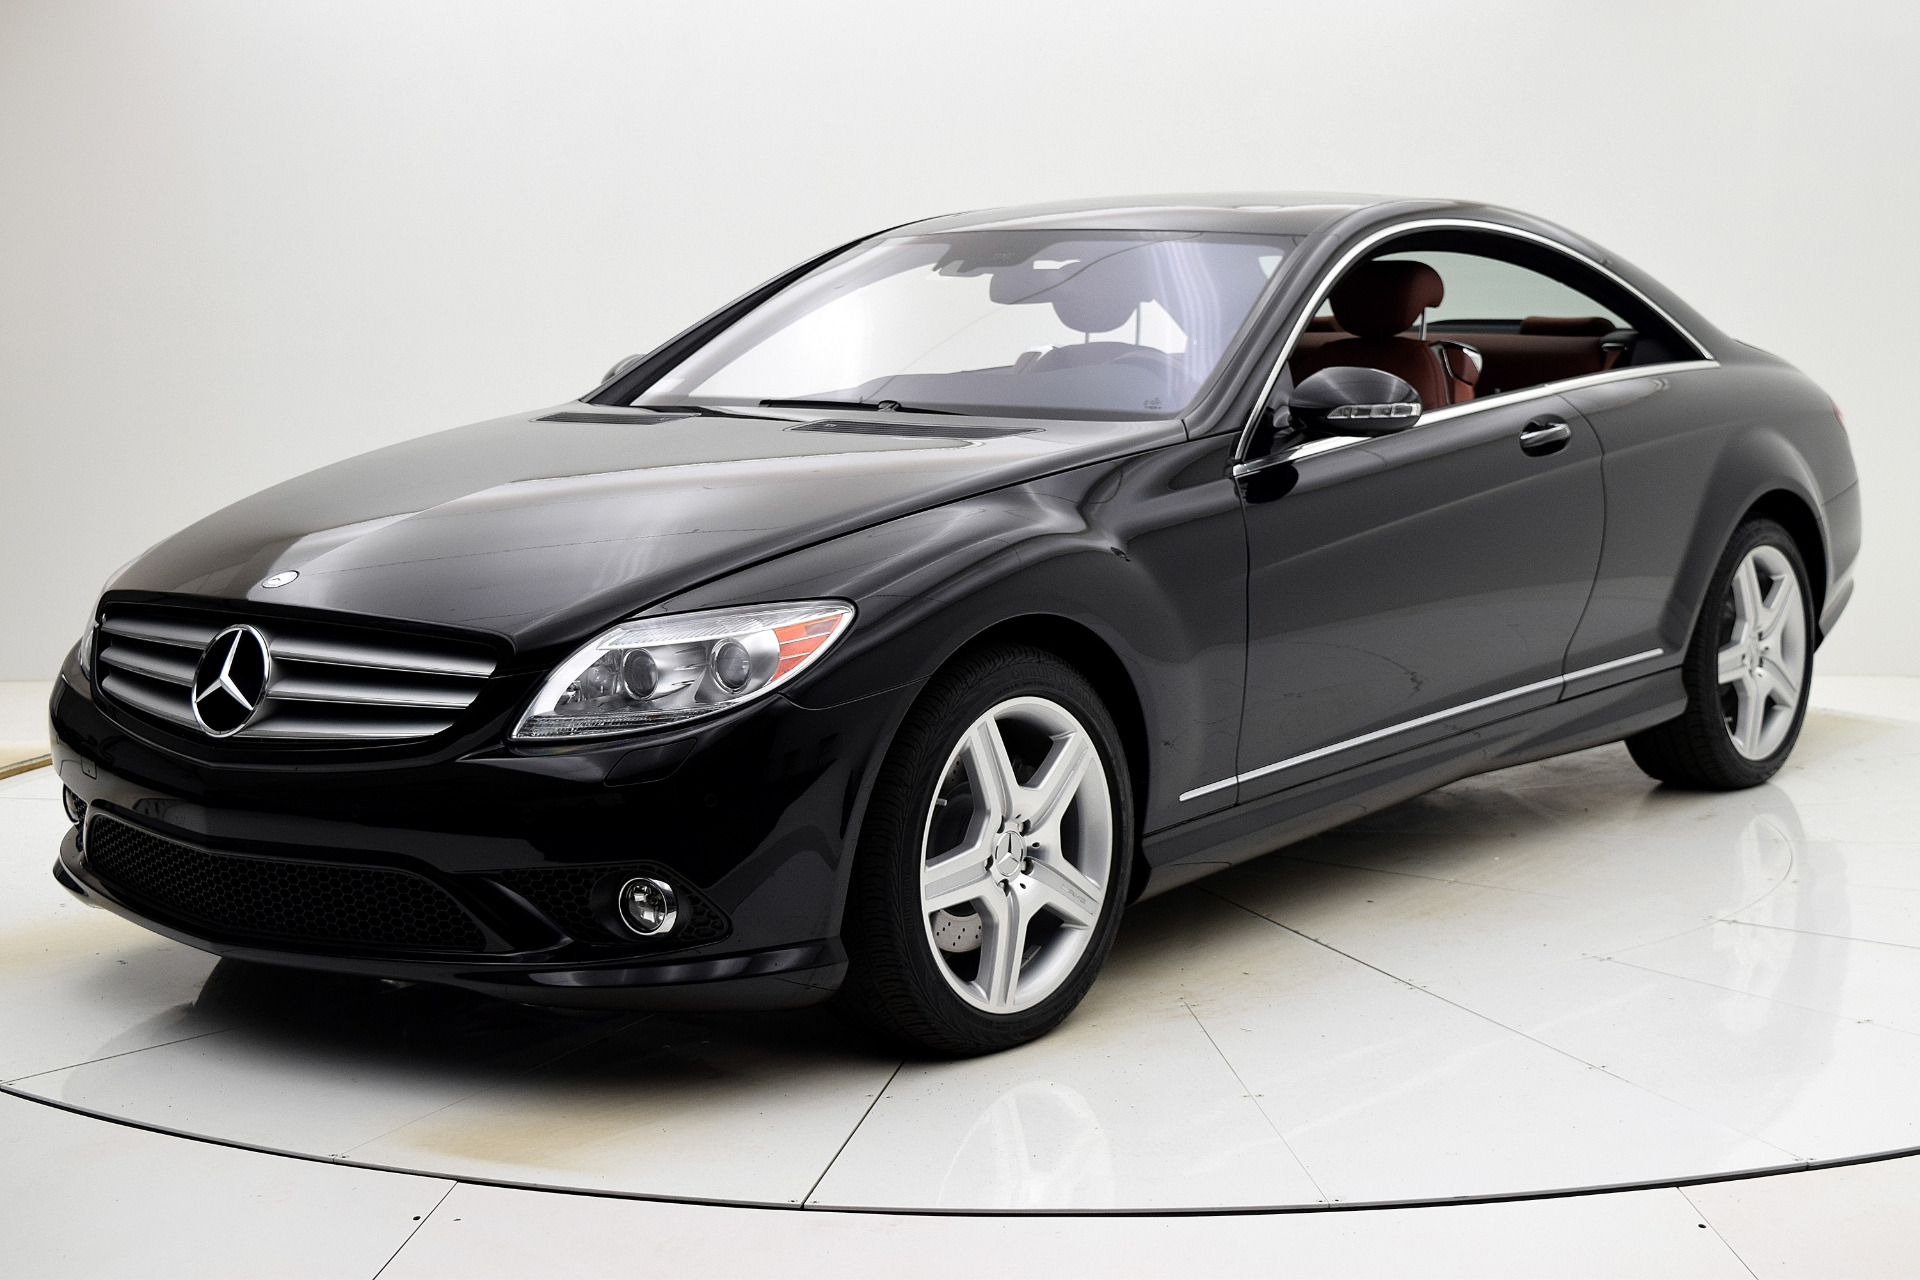 Used 2009 Mercedes-Benz CL-Class 5.5L V8 for sale Sold at Bentley Palmyra N.J. in Palmyra NJ 08065 2